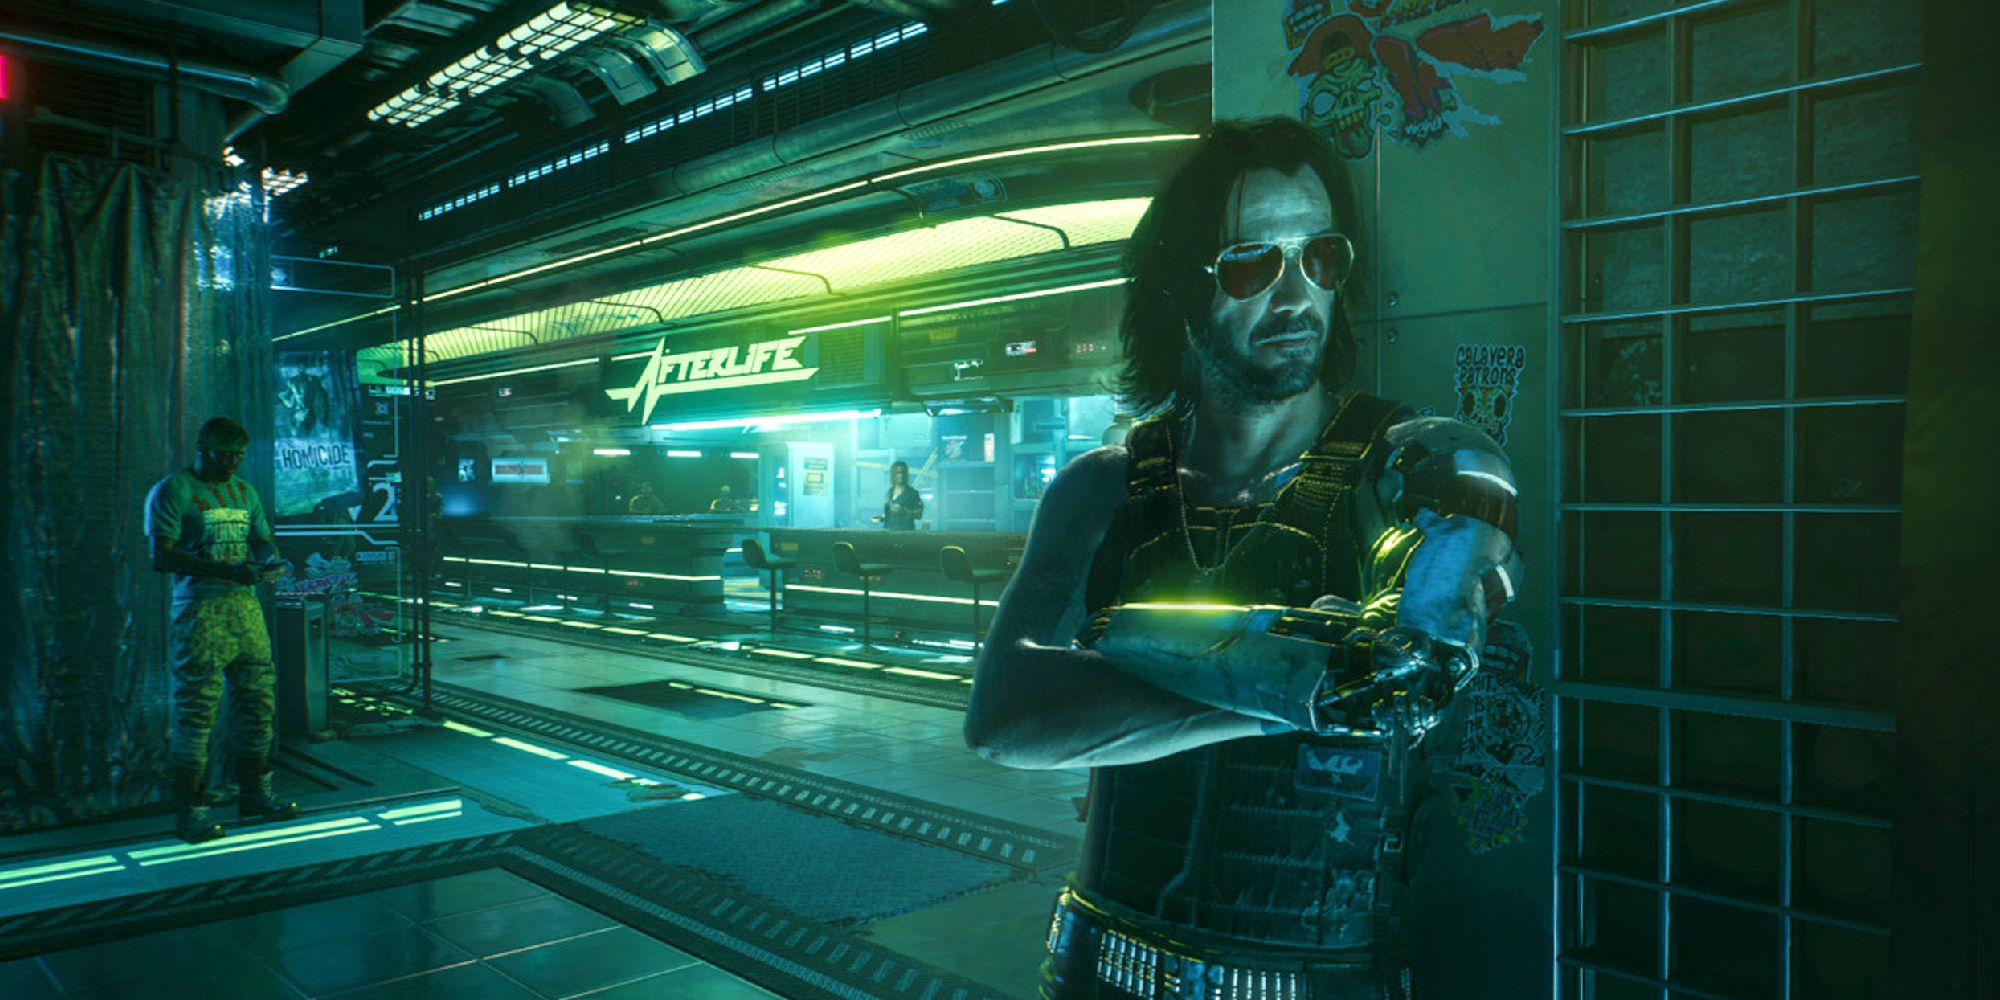 Johnny leaning against a wall with an air of disinterest in the neon green bar Afterlife in Cyberpunk 2077